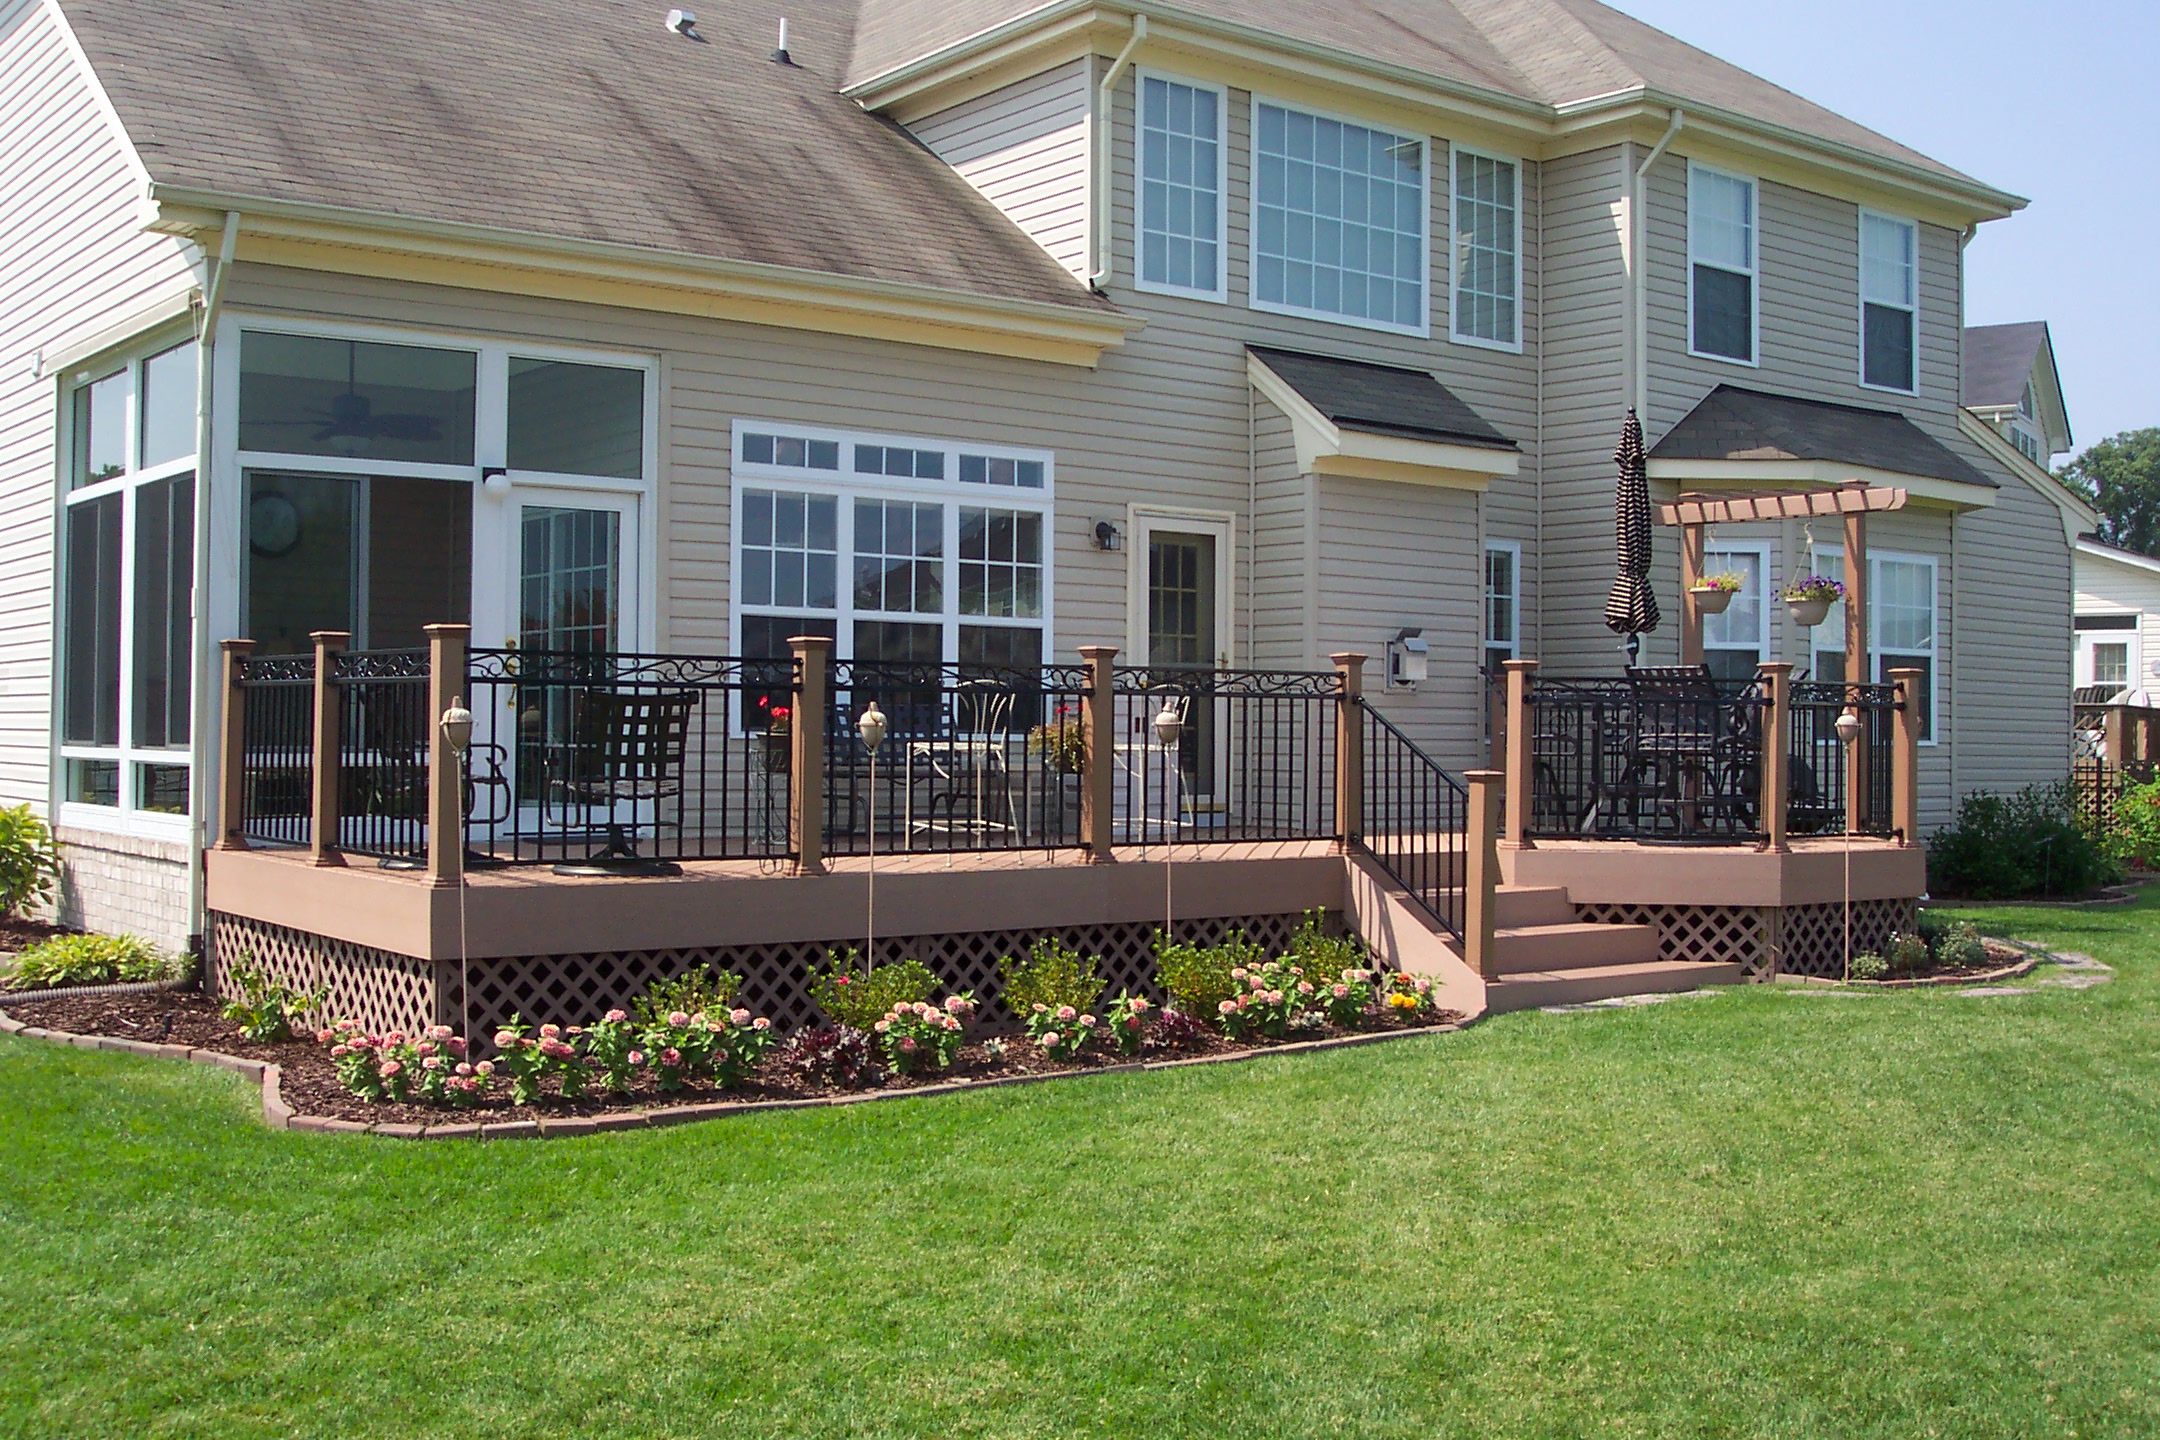 5 Ways To Make Your Deck Better | St. Louis decks, screened porches, pergolas by Archadeck on Landscaping Around Deck
 id=46006